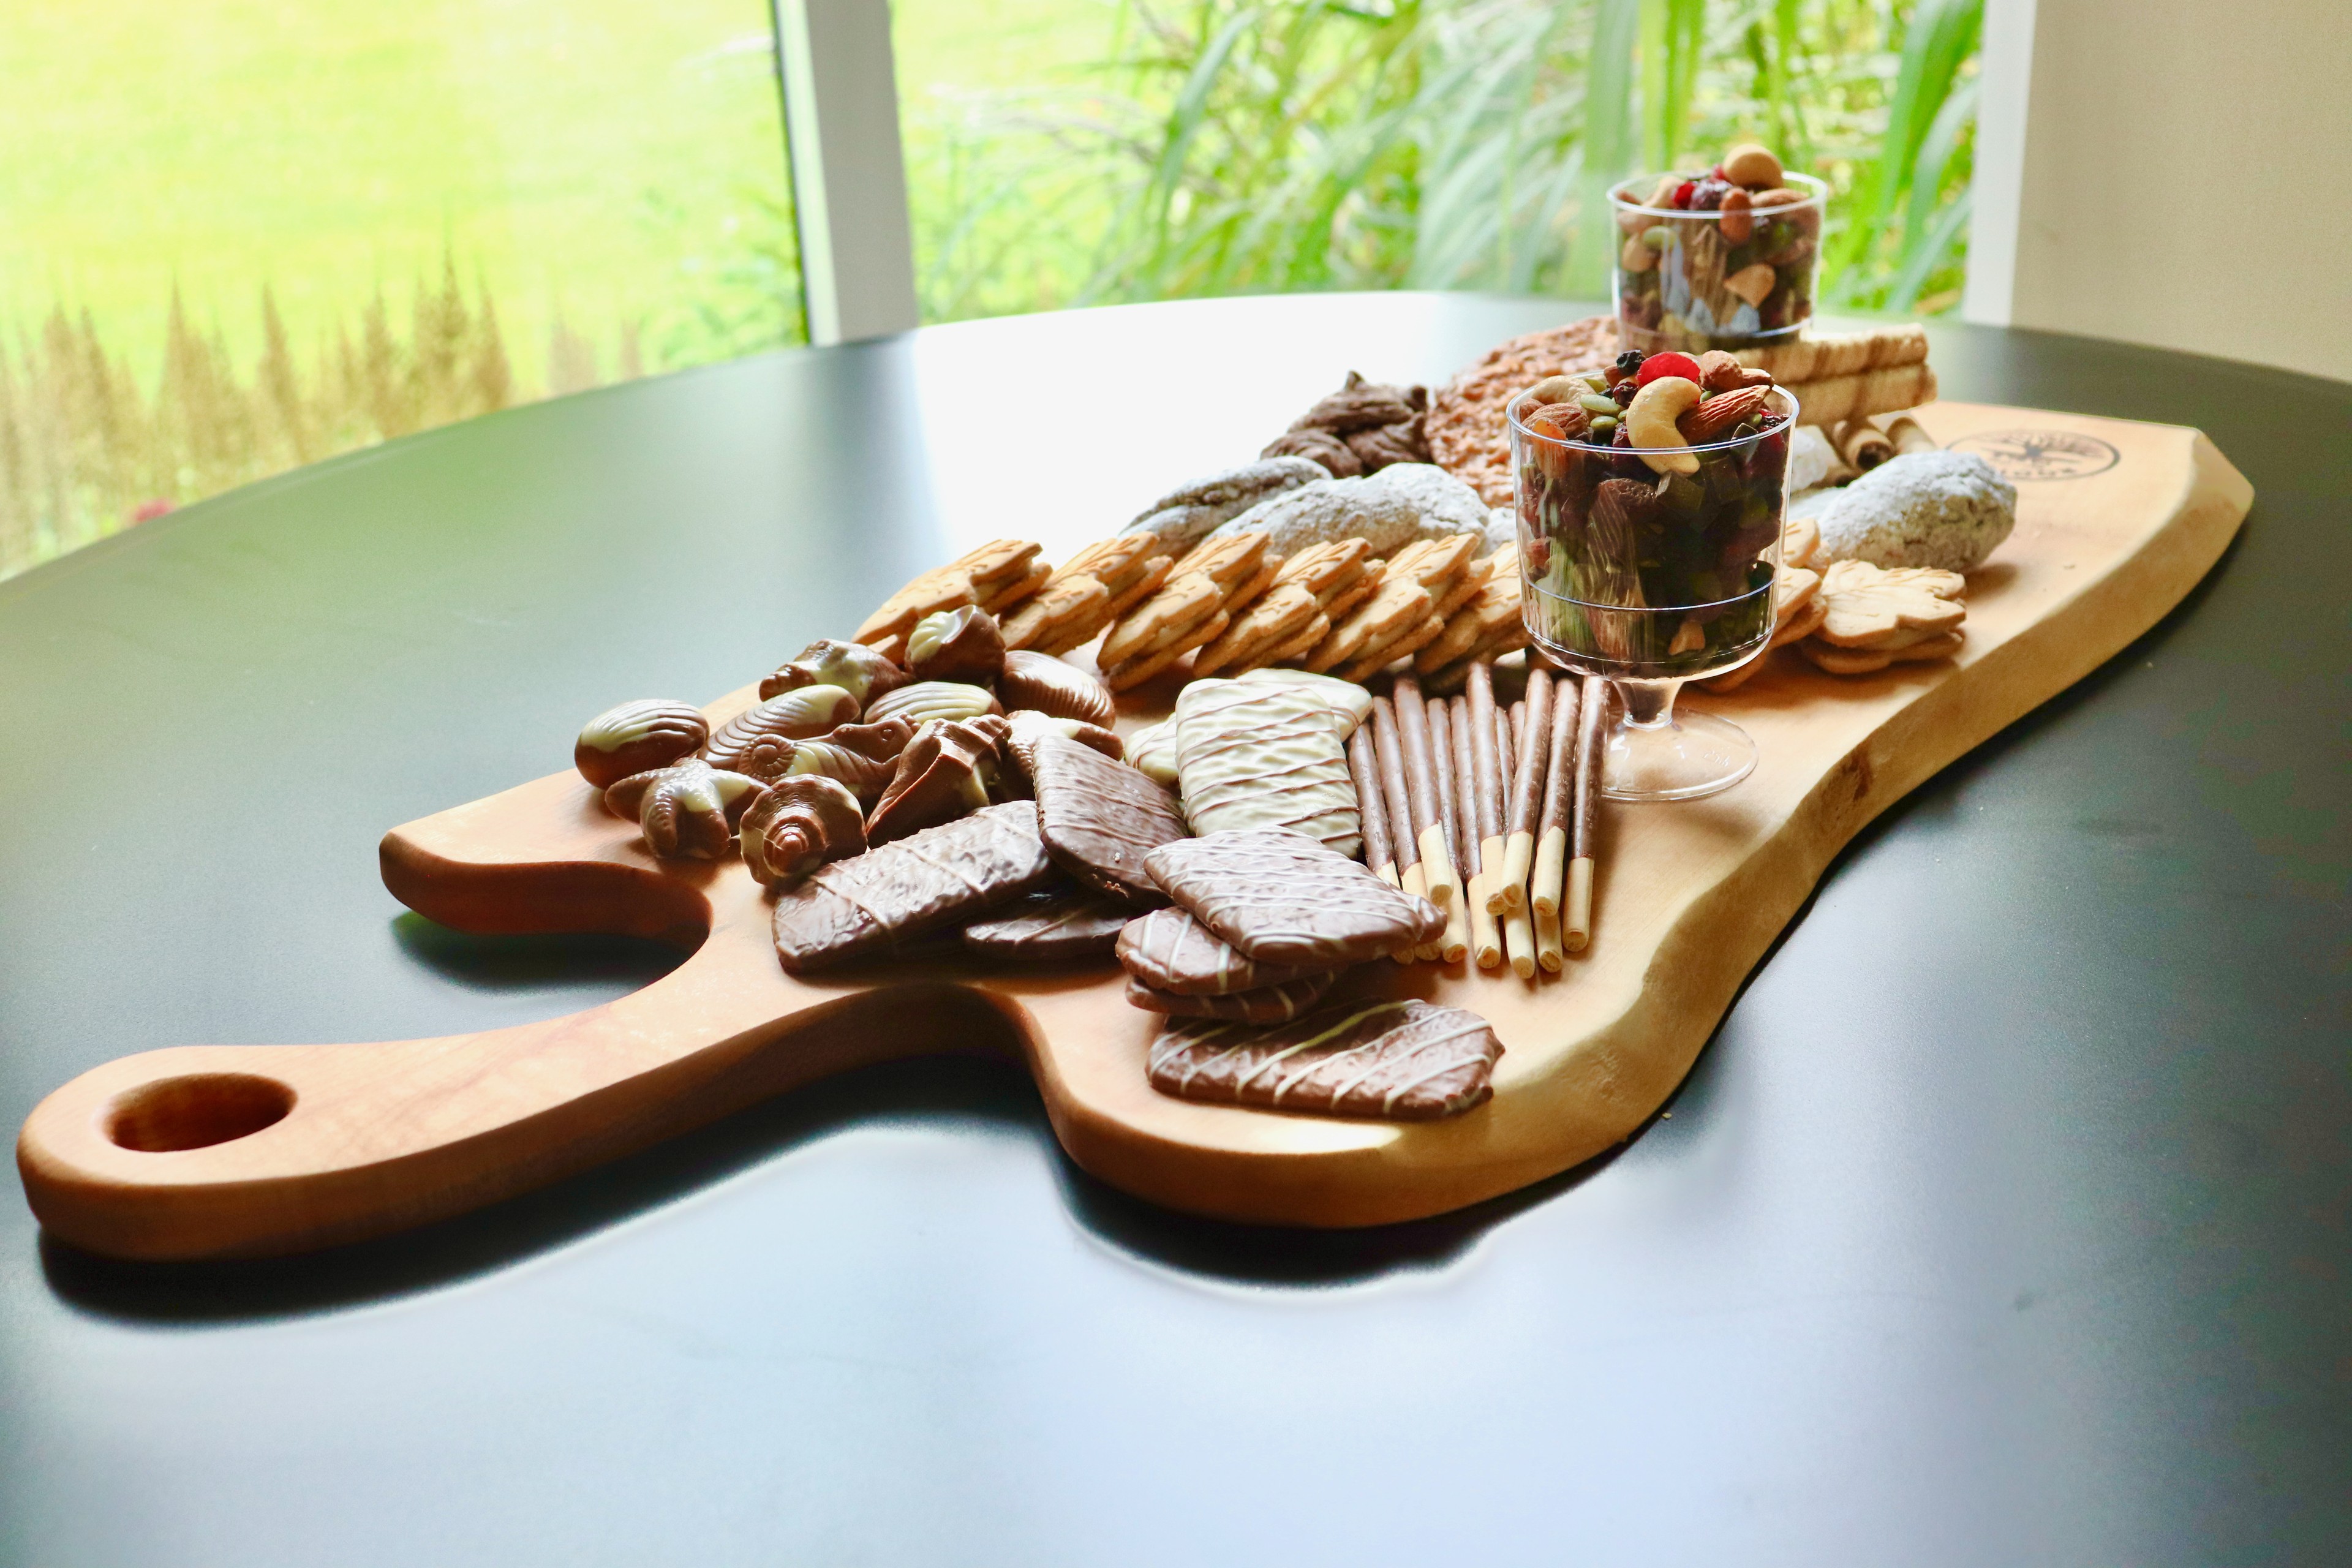 Canopy live edge charcuterie board with scrumptious dessert toppings